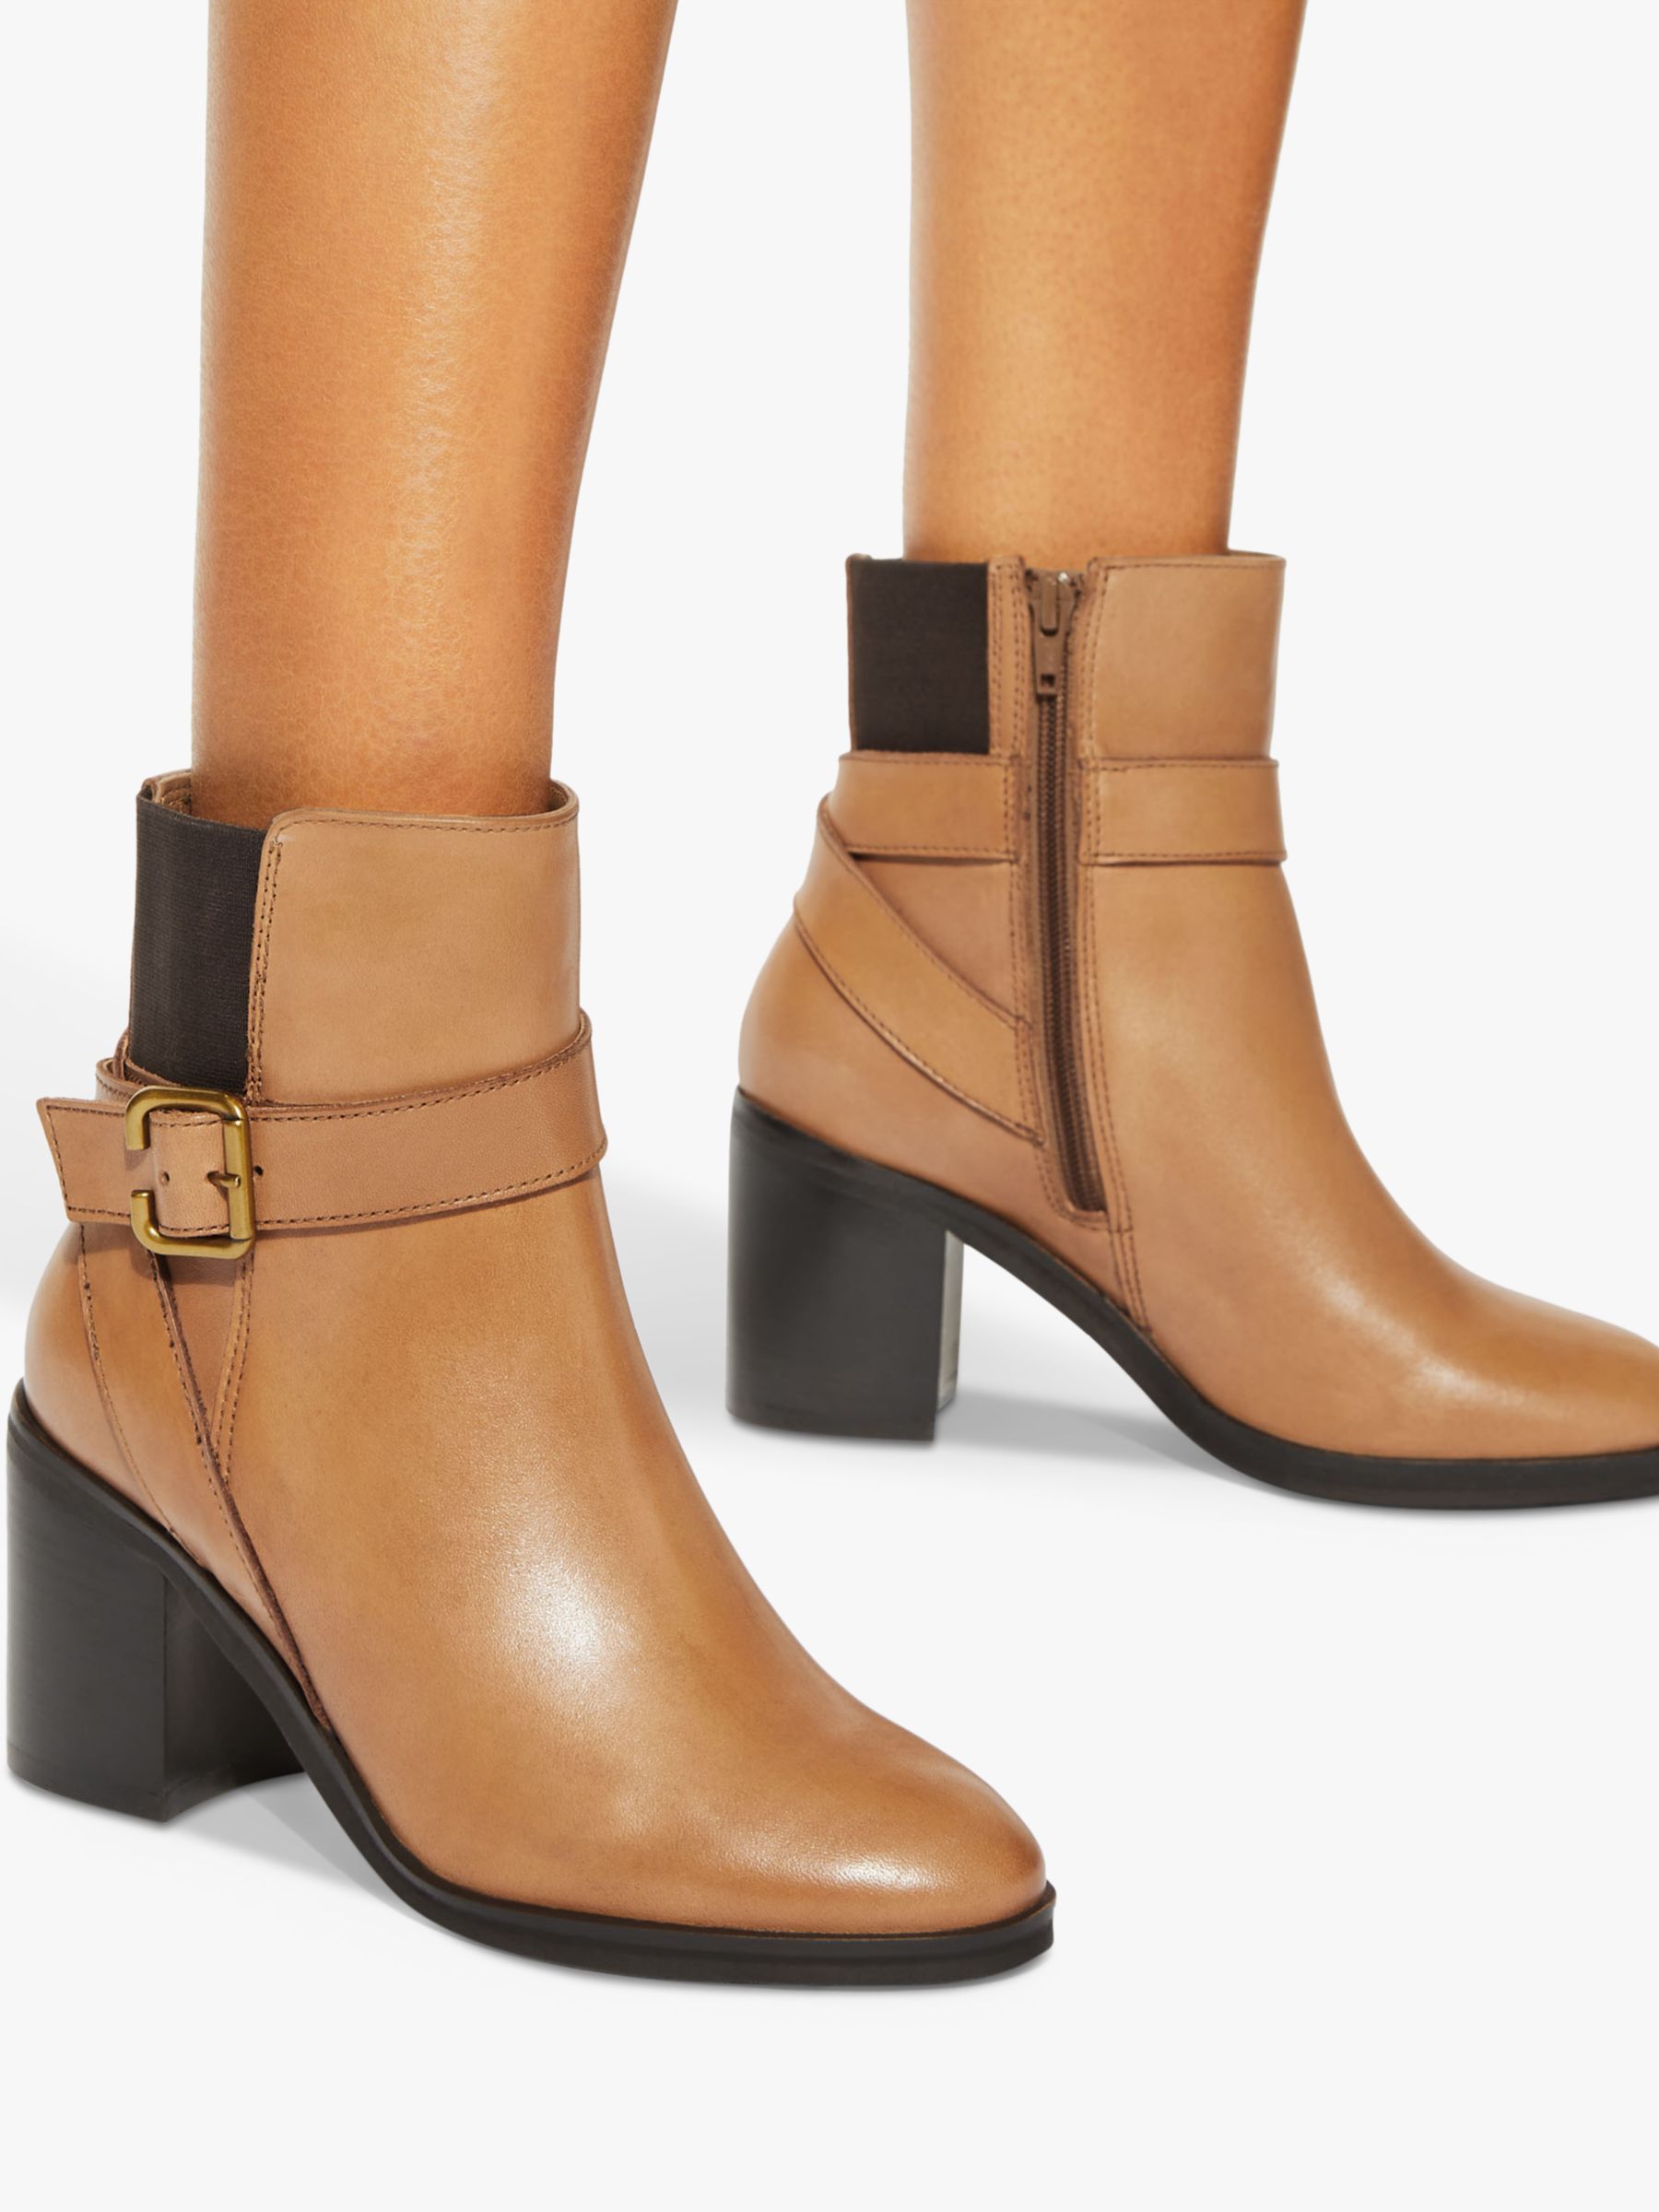 Buy Kurt Geiger London Hampstead Leather Ankle Boots, Tan Online at johnlewis.com